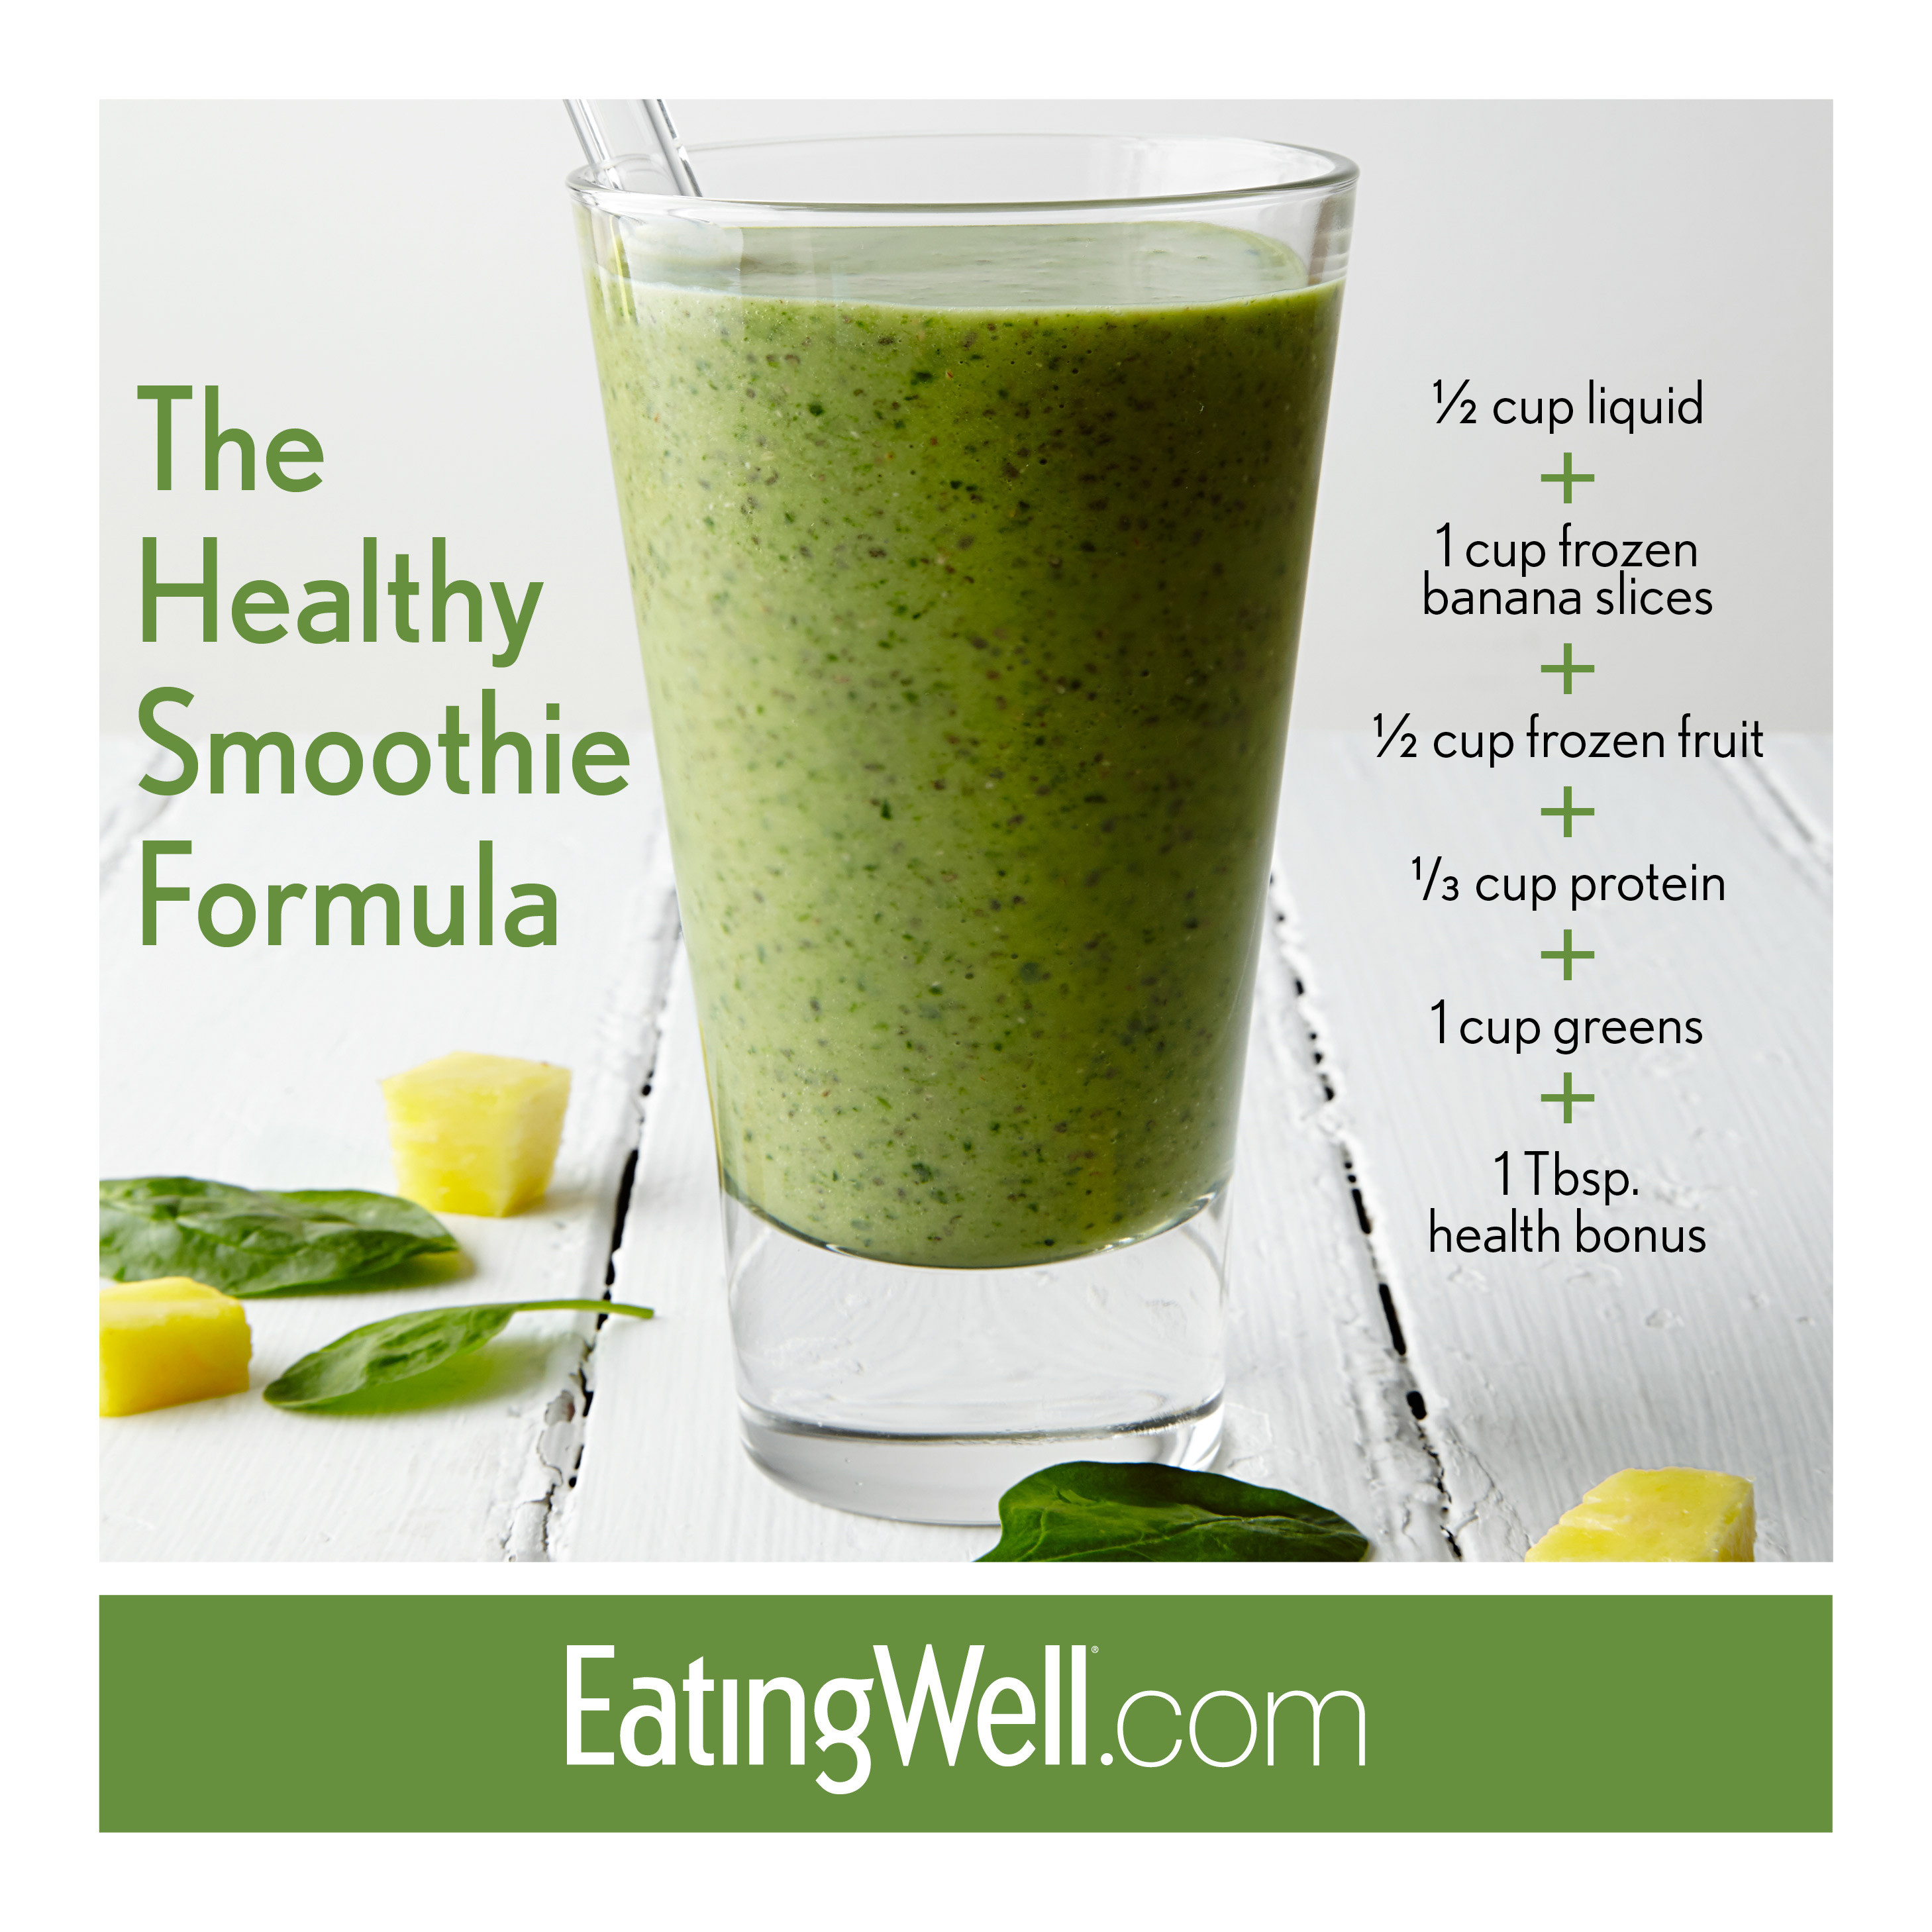 Good Healthy Smoothie Recipes
 The Ultimate Green Smoothie Recipe EatingWell